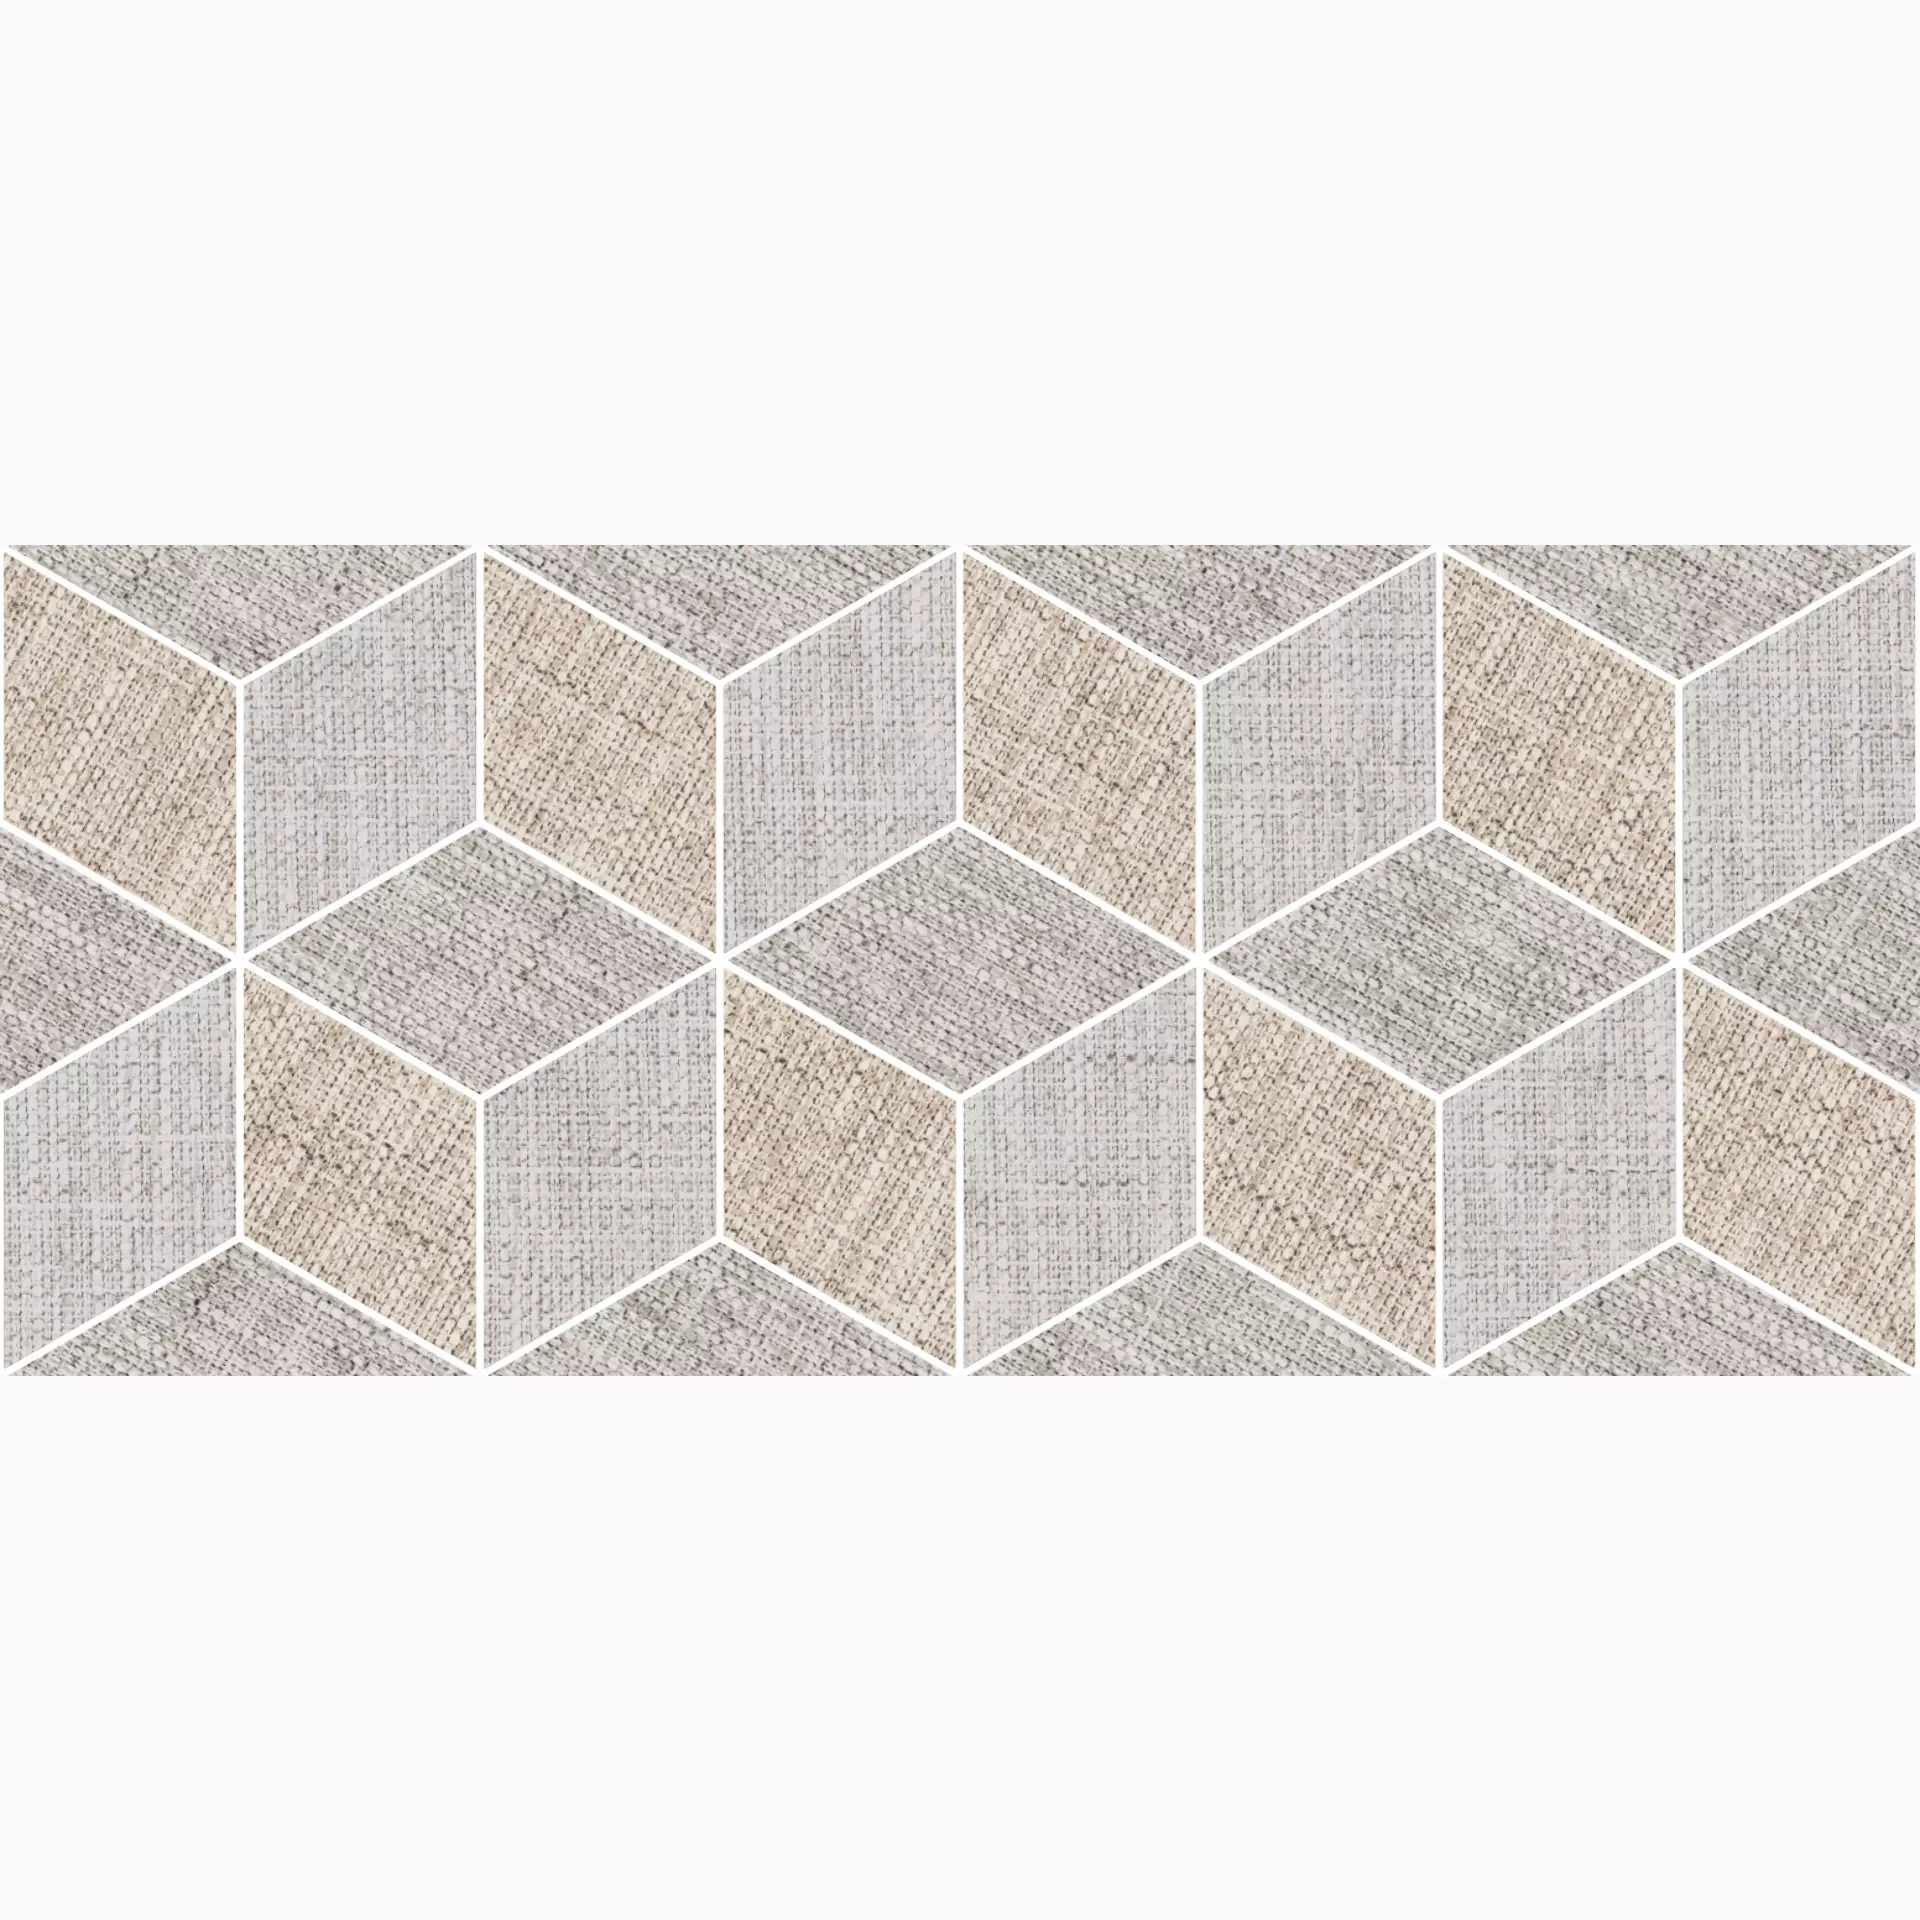 Sant Agostino Fineart Light Natural Hexagon Mix CSAEXFML01 20x46cm rectified 10mm